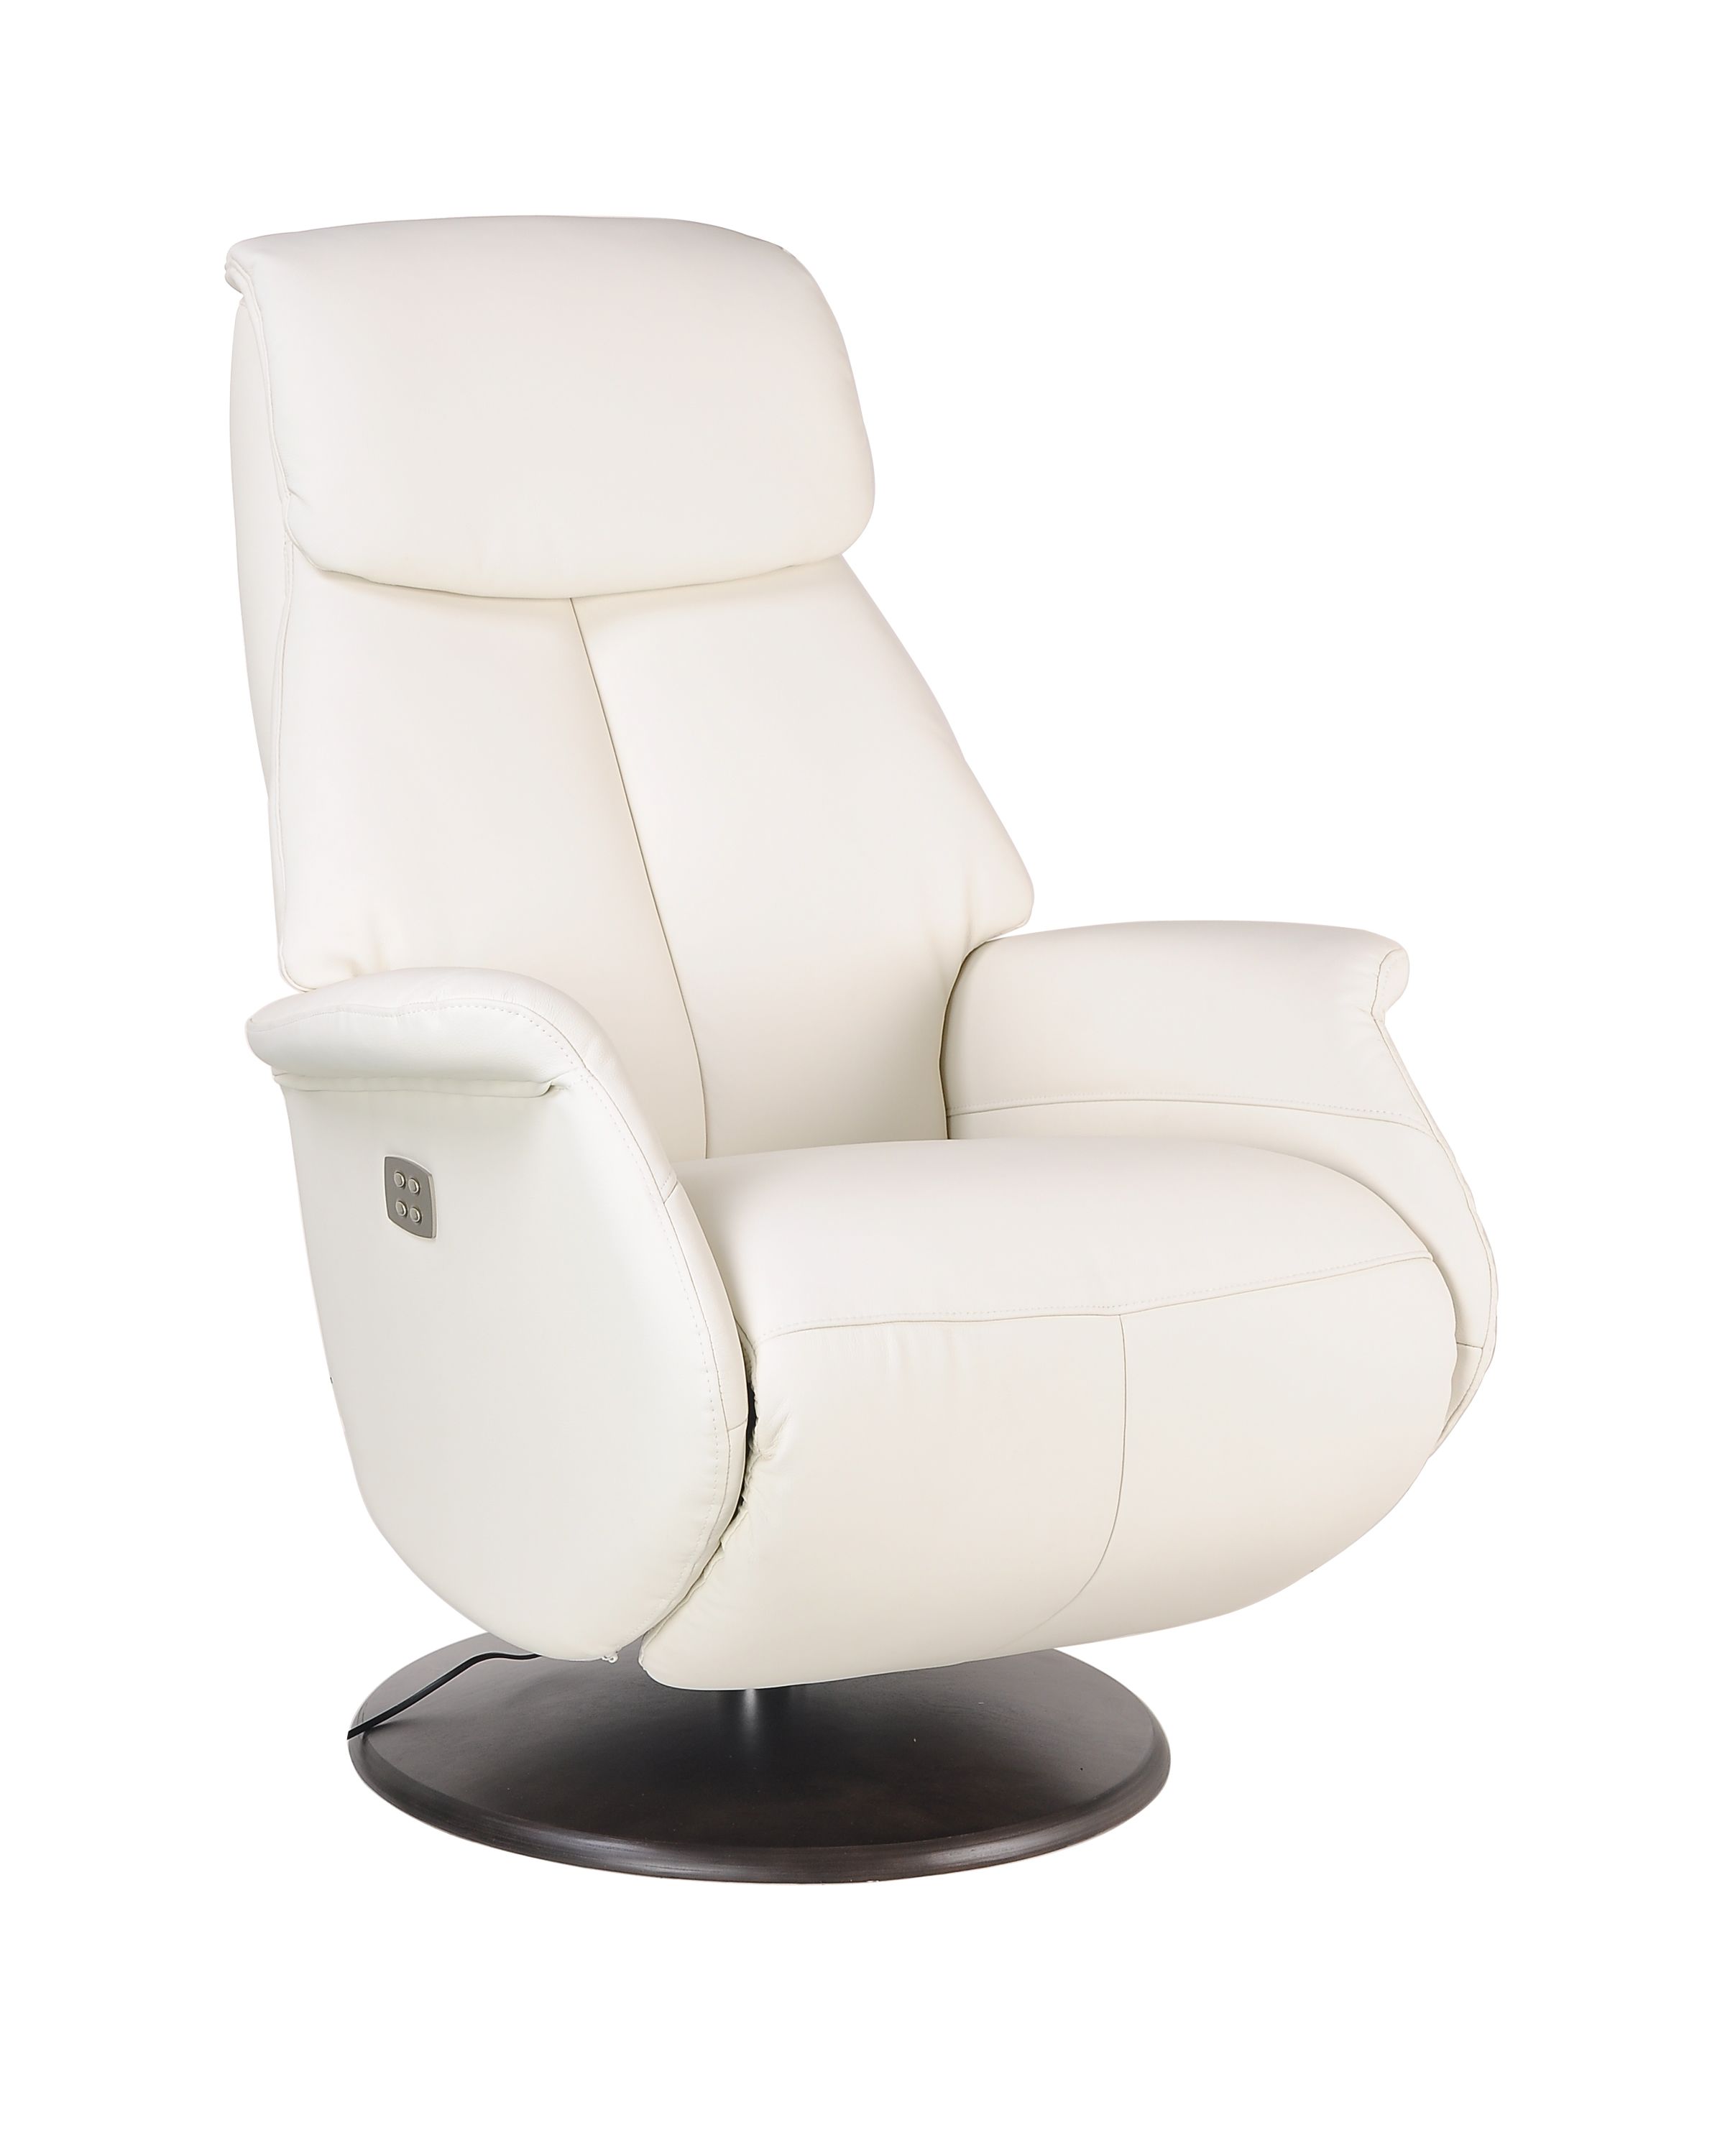 Leather and Microstar electric relaxation chair - AETOS